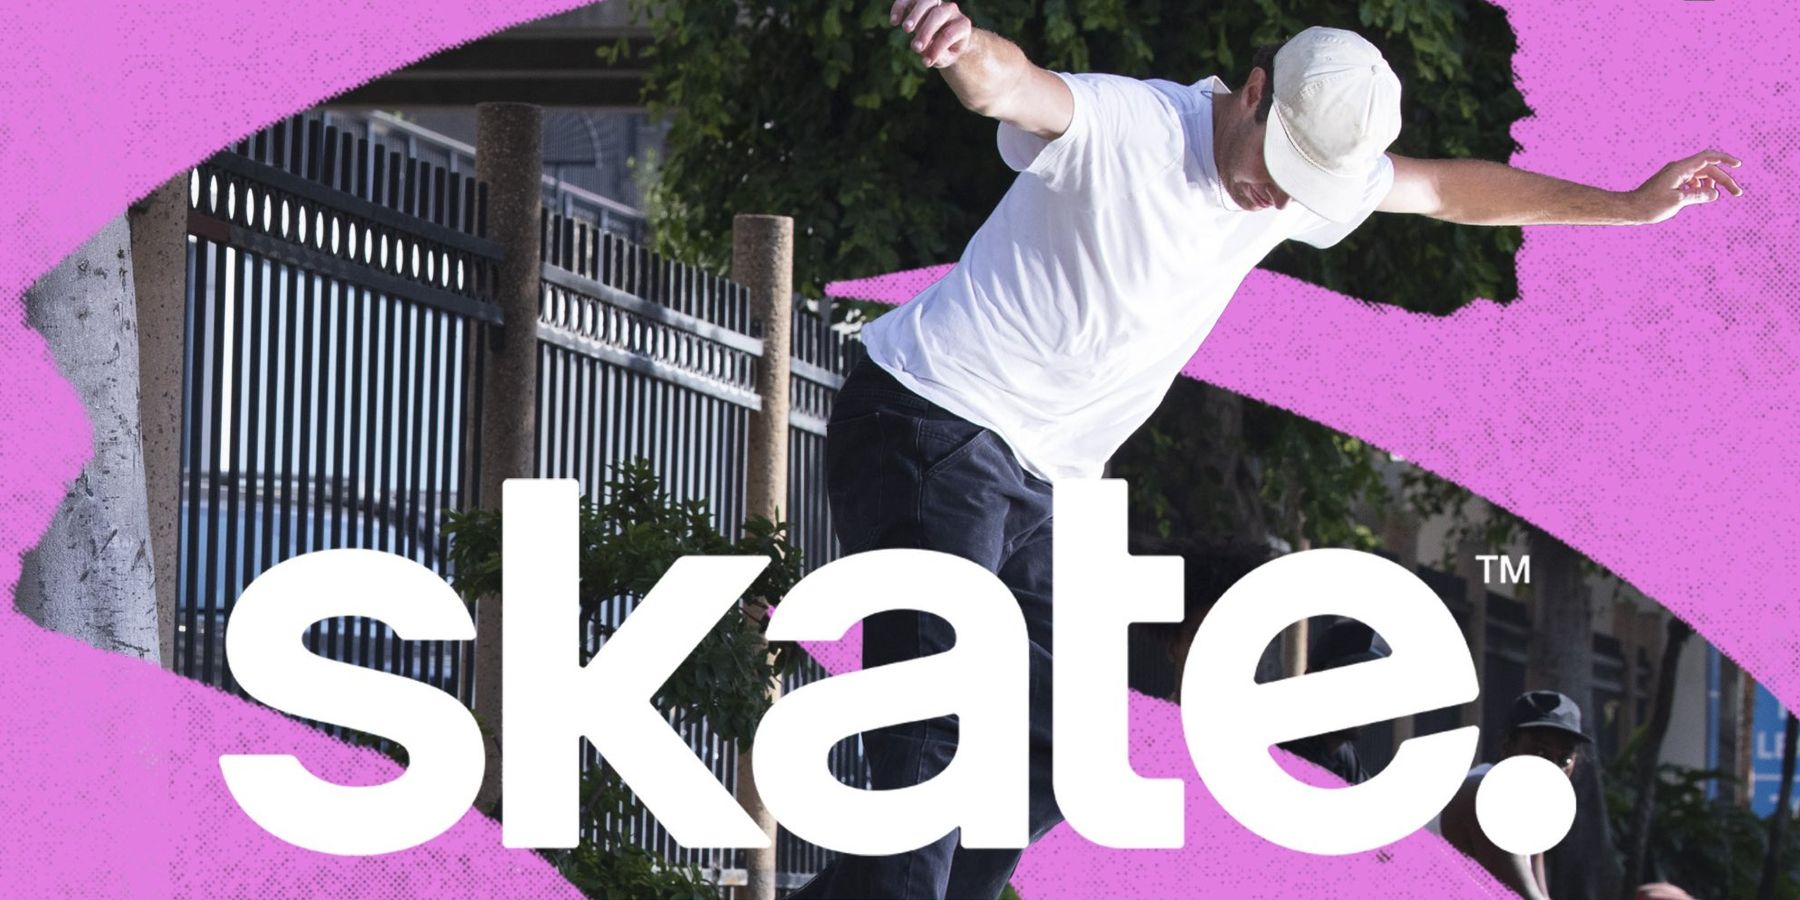 Xbox Game Pass Ultimate Subscribers Can Claim Skate 3 DLC for Free